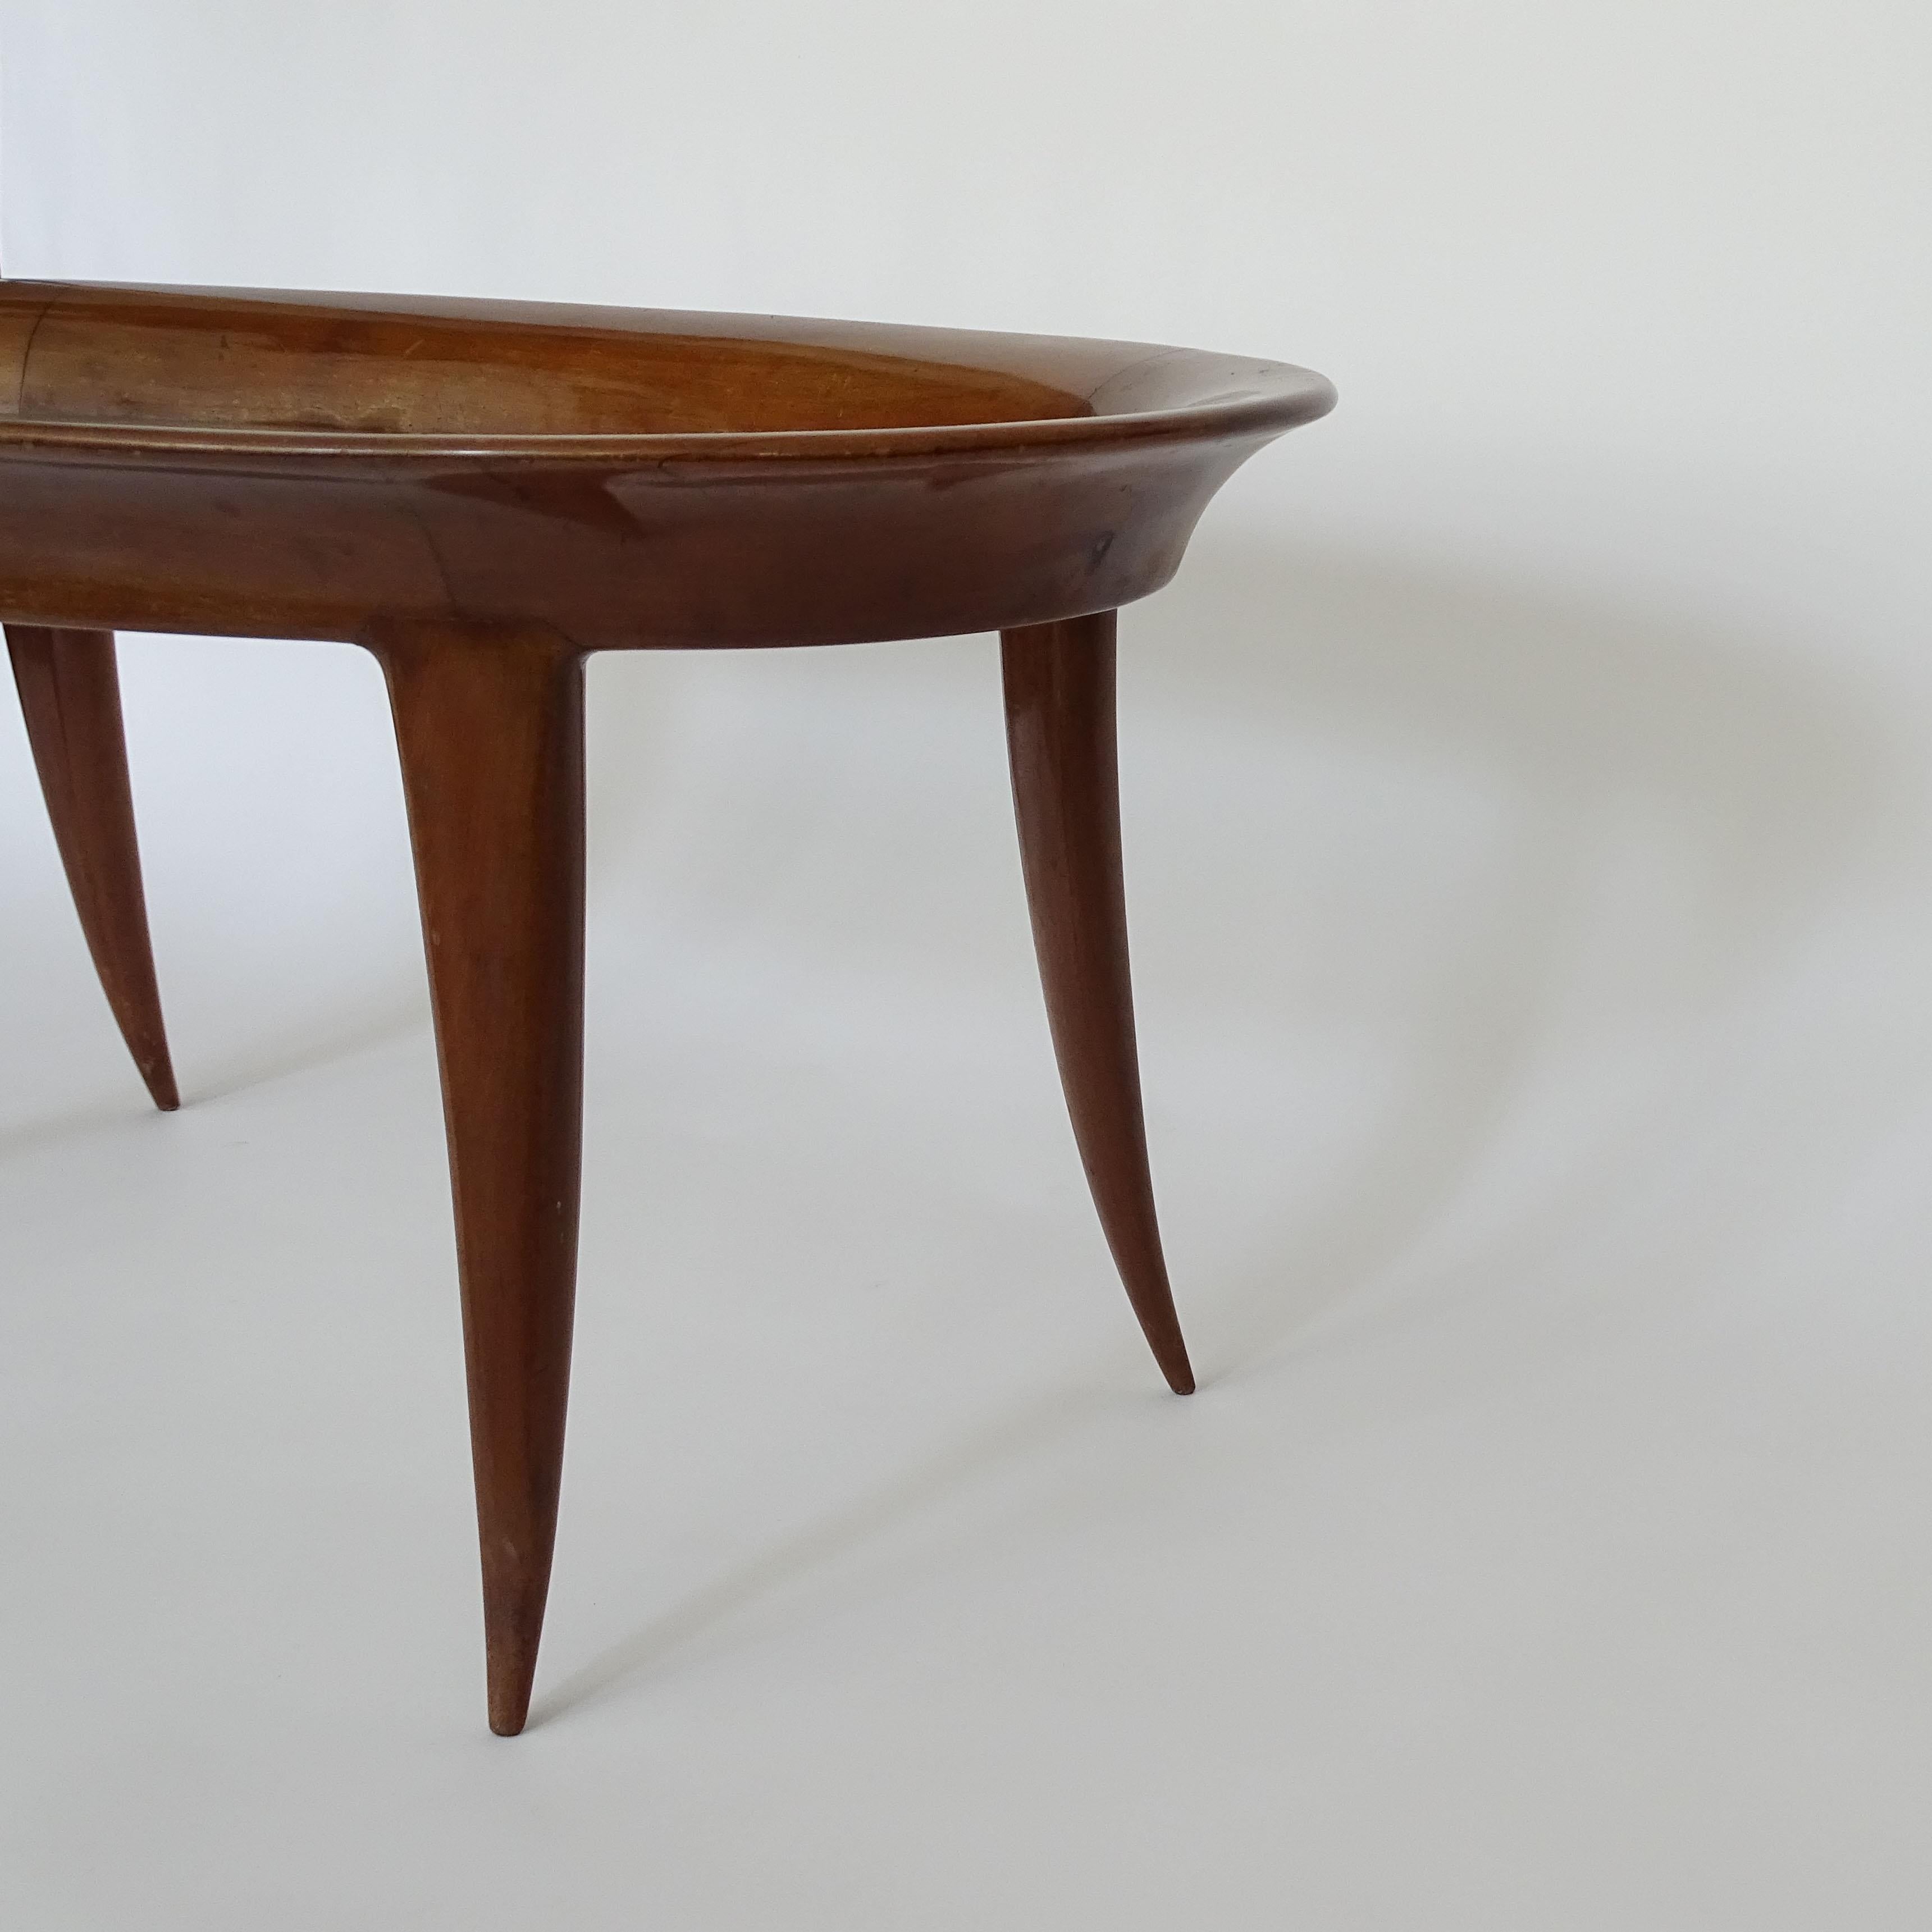 Italian 1940s Sculpted Oval Coffee Table Attributed to Fontana Arte For Sale 3